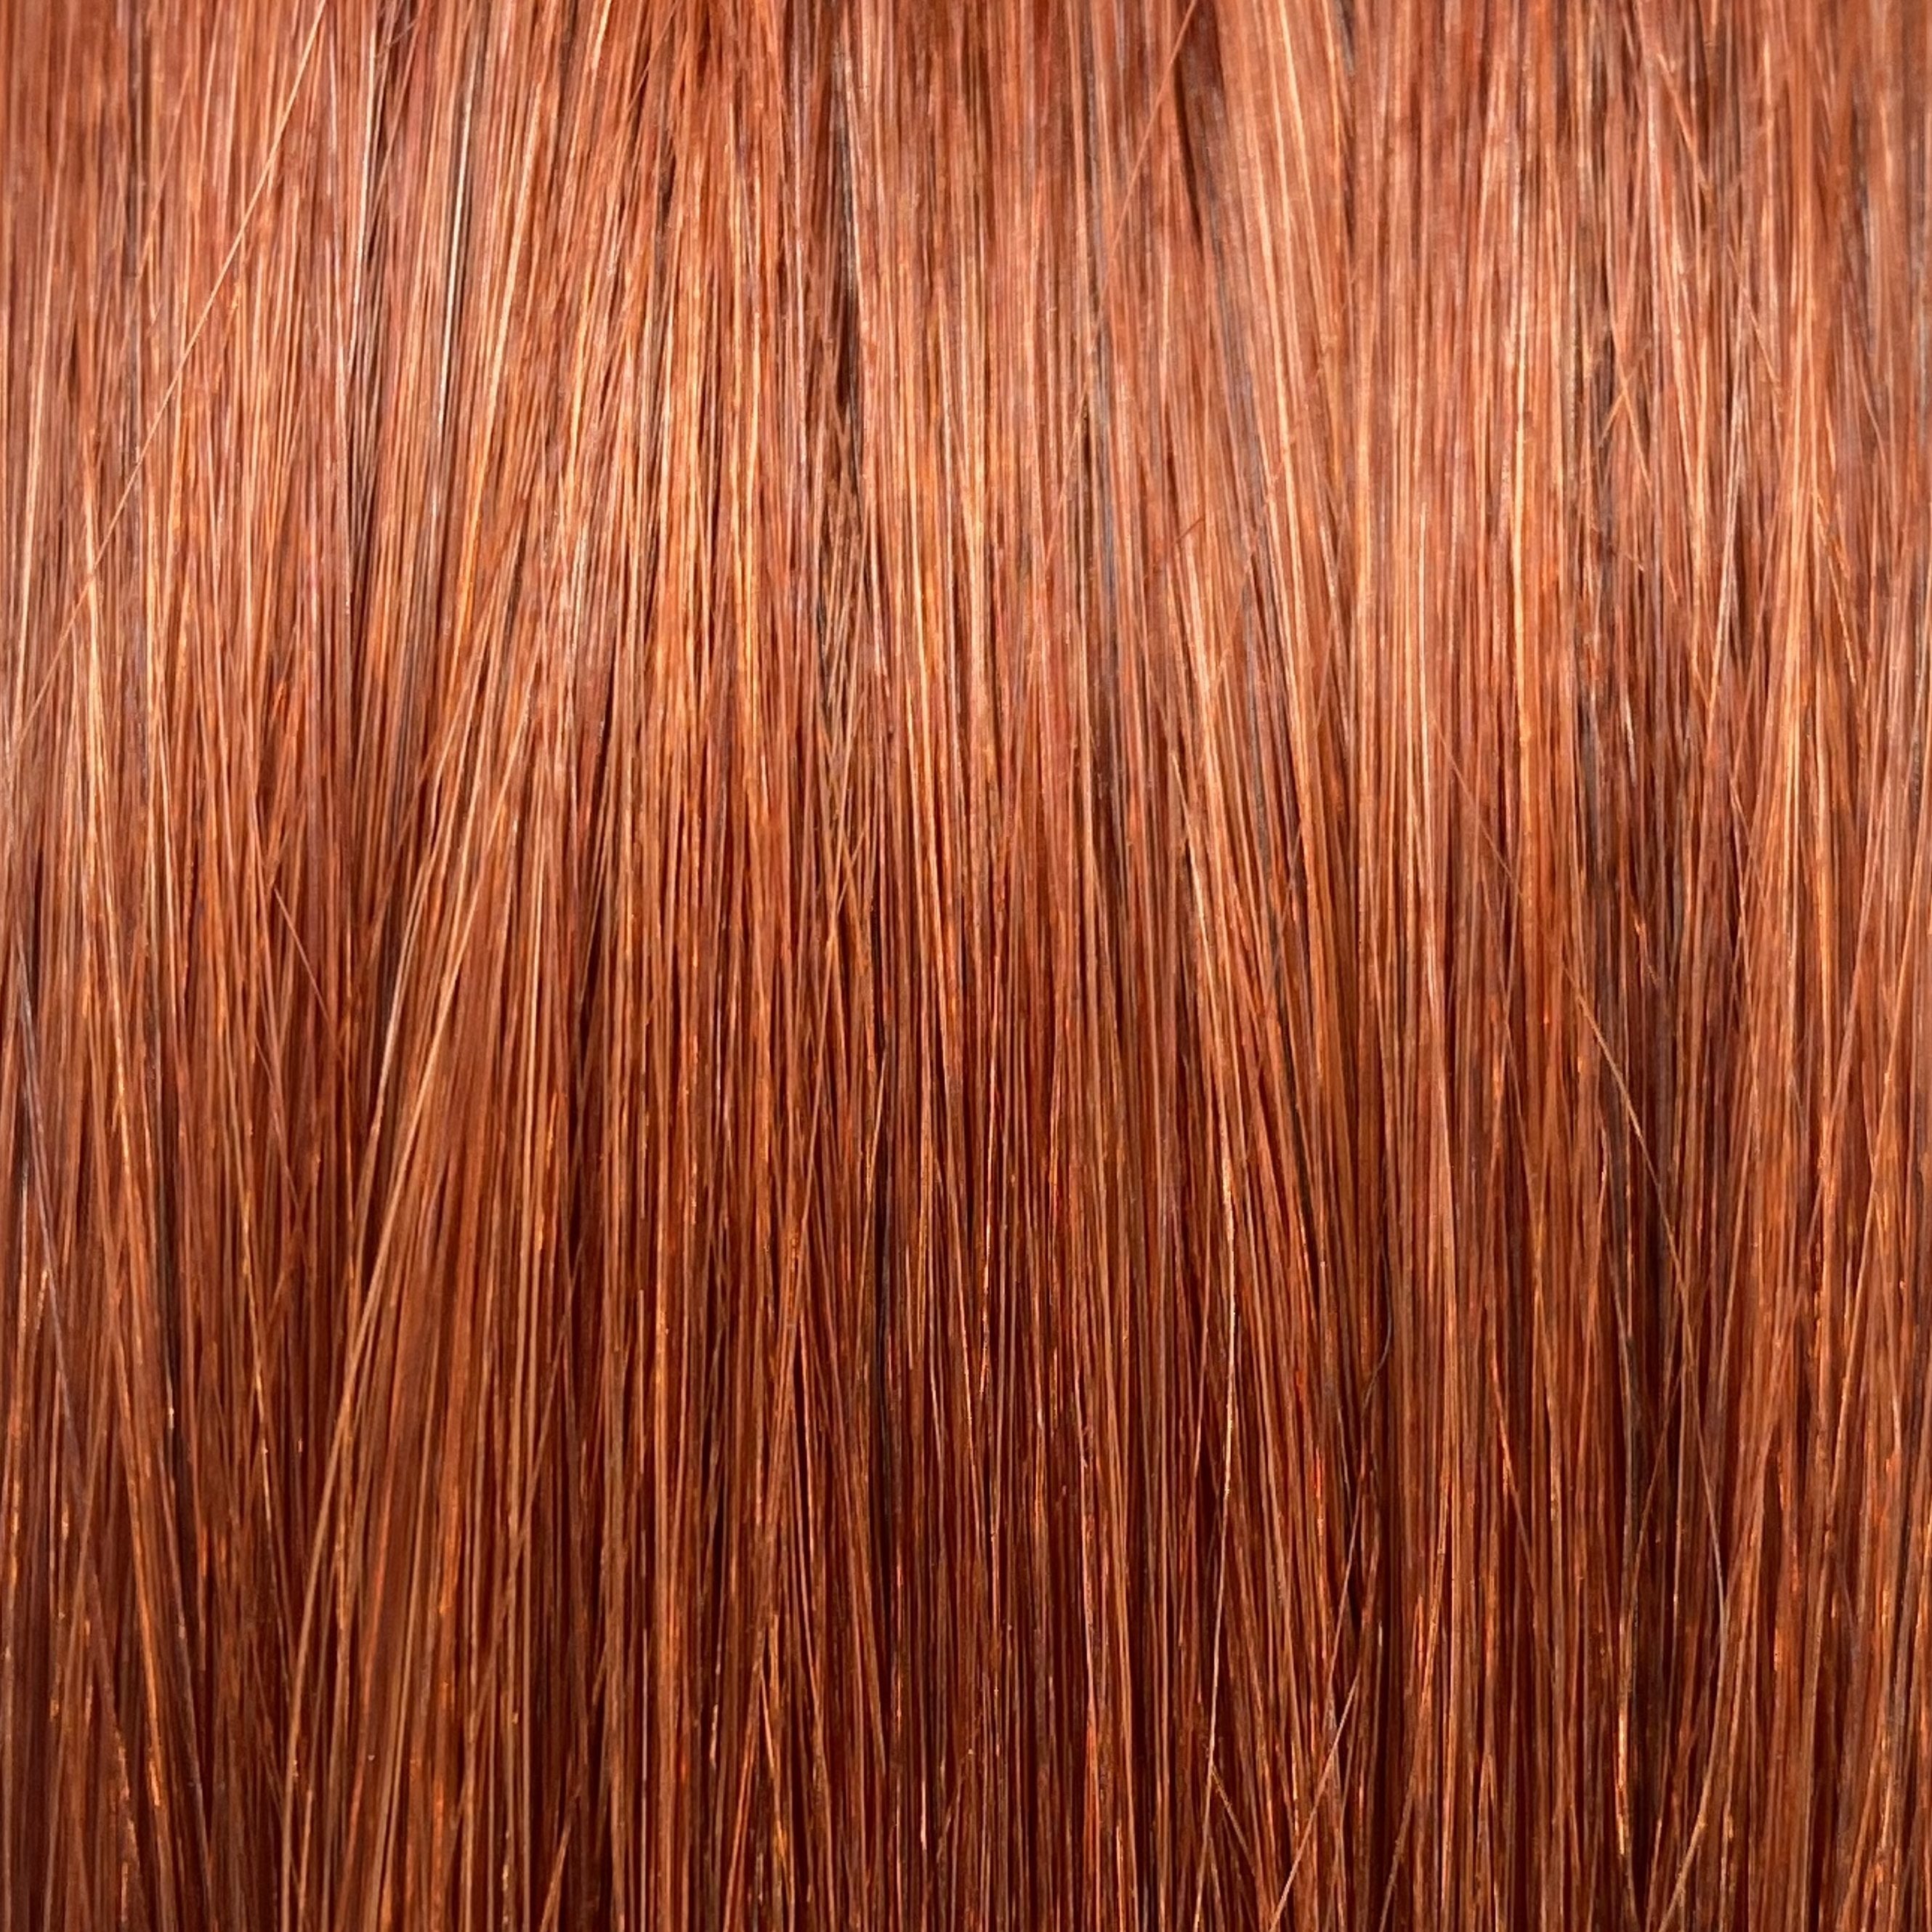 FUSION #130 COPPER RED LIGHT BLONDE 50CM/ 20 INCHES  -  20 GRAMS - Image 1